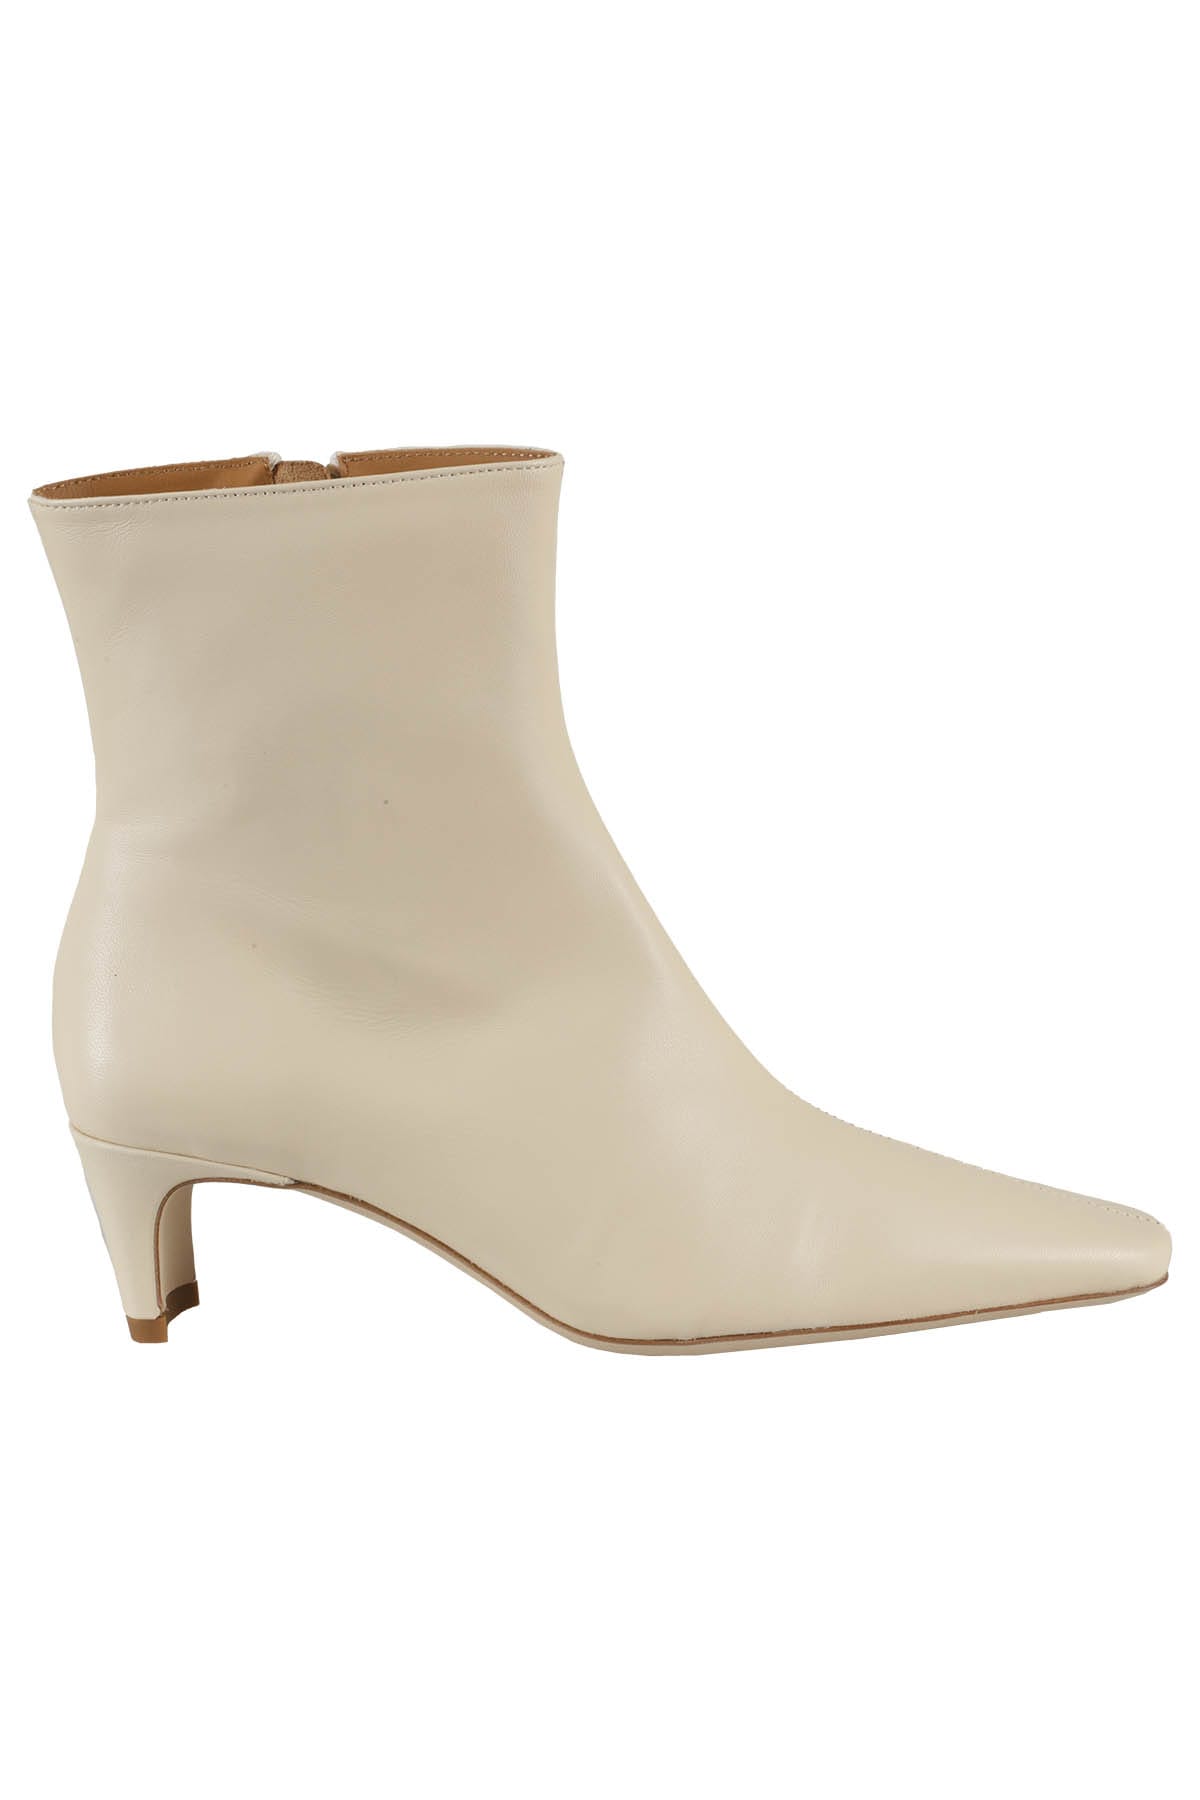 STAUD WALLY ANKLE BOOT